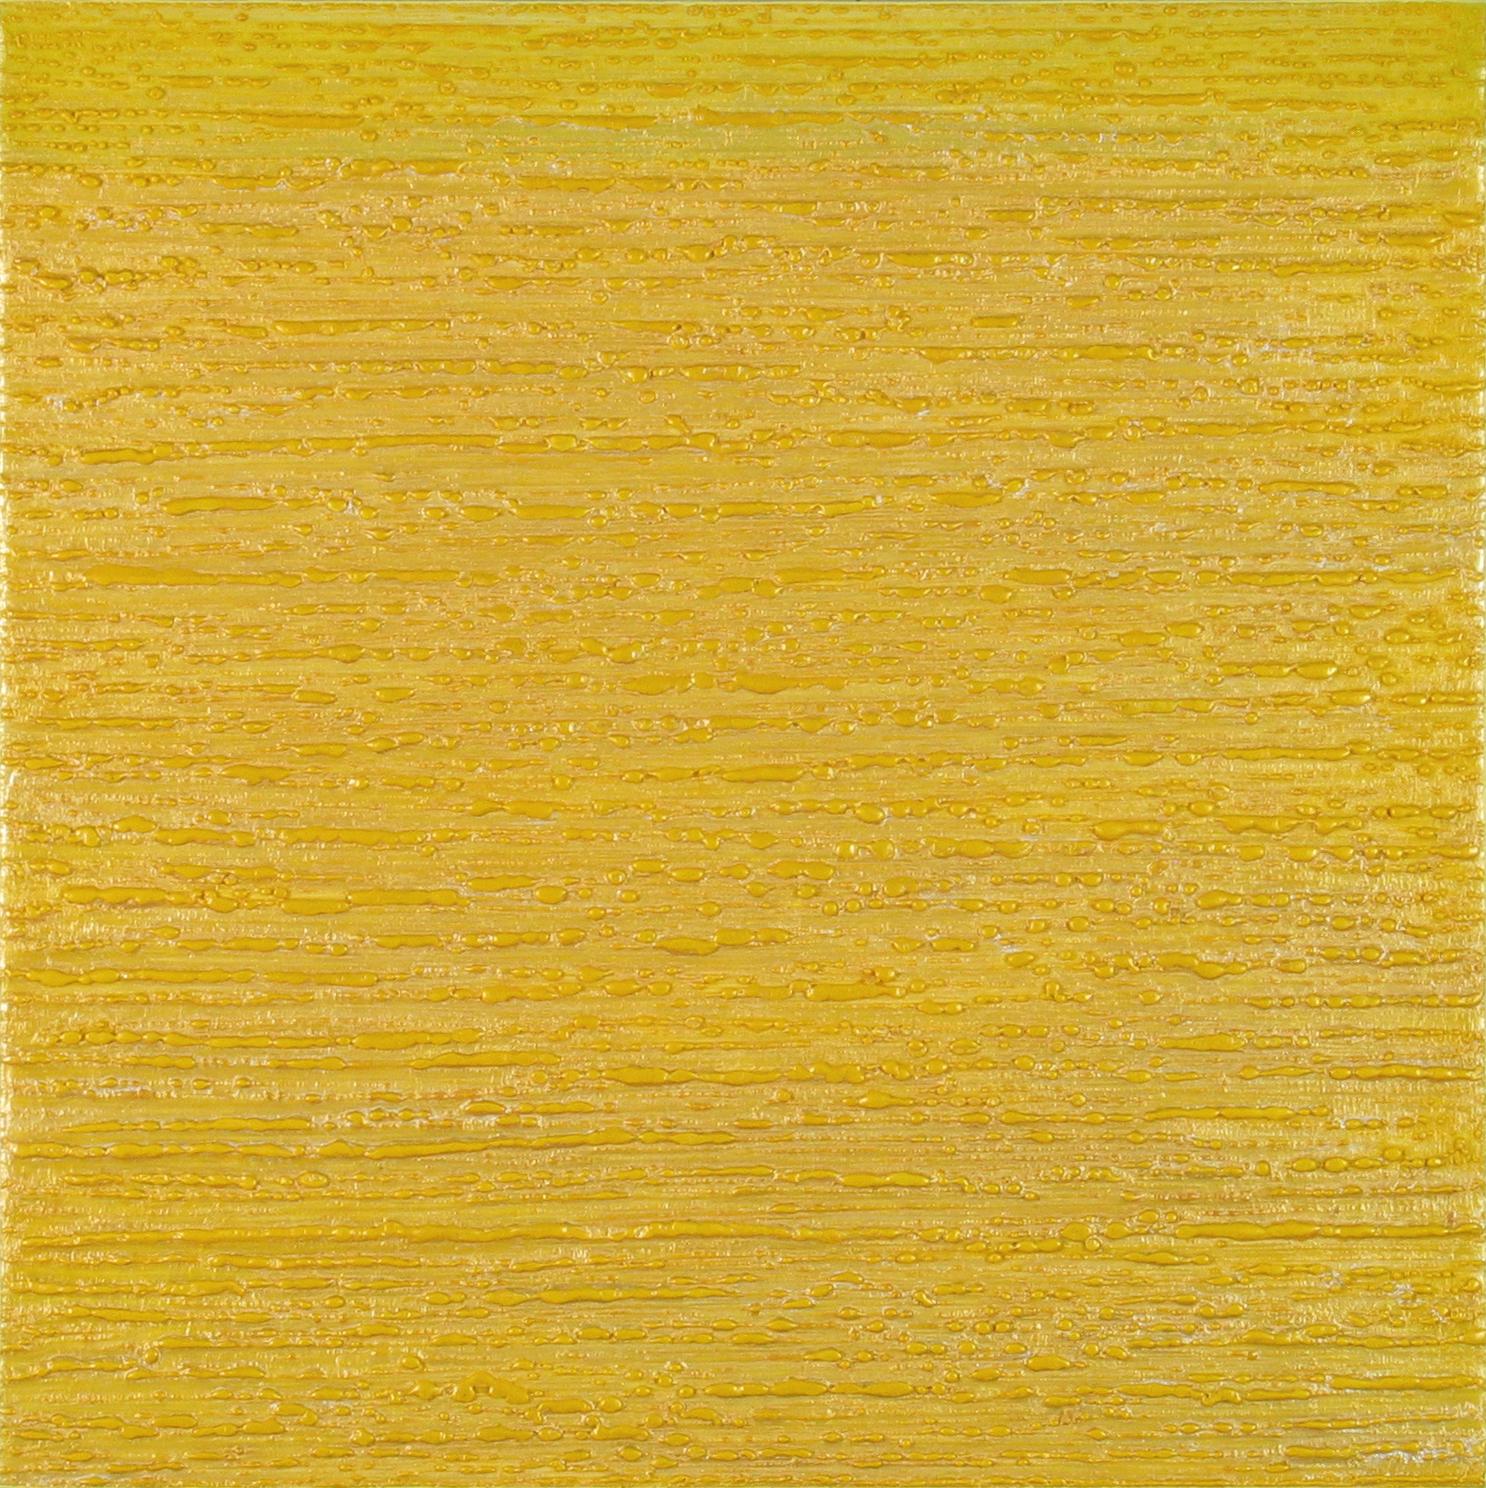 A yellow encaustic (pigmented beeswax) painting on birch panel accented with light neon lemon yellow edges. Signed, dated and titled on verso.

Joanne Mattera’s paintings can be described as lush minimalism, the work is chromatically rich and